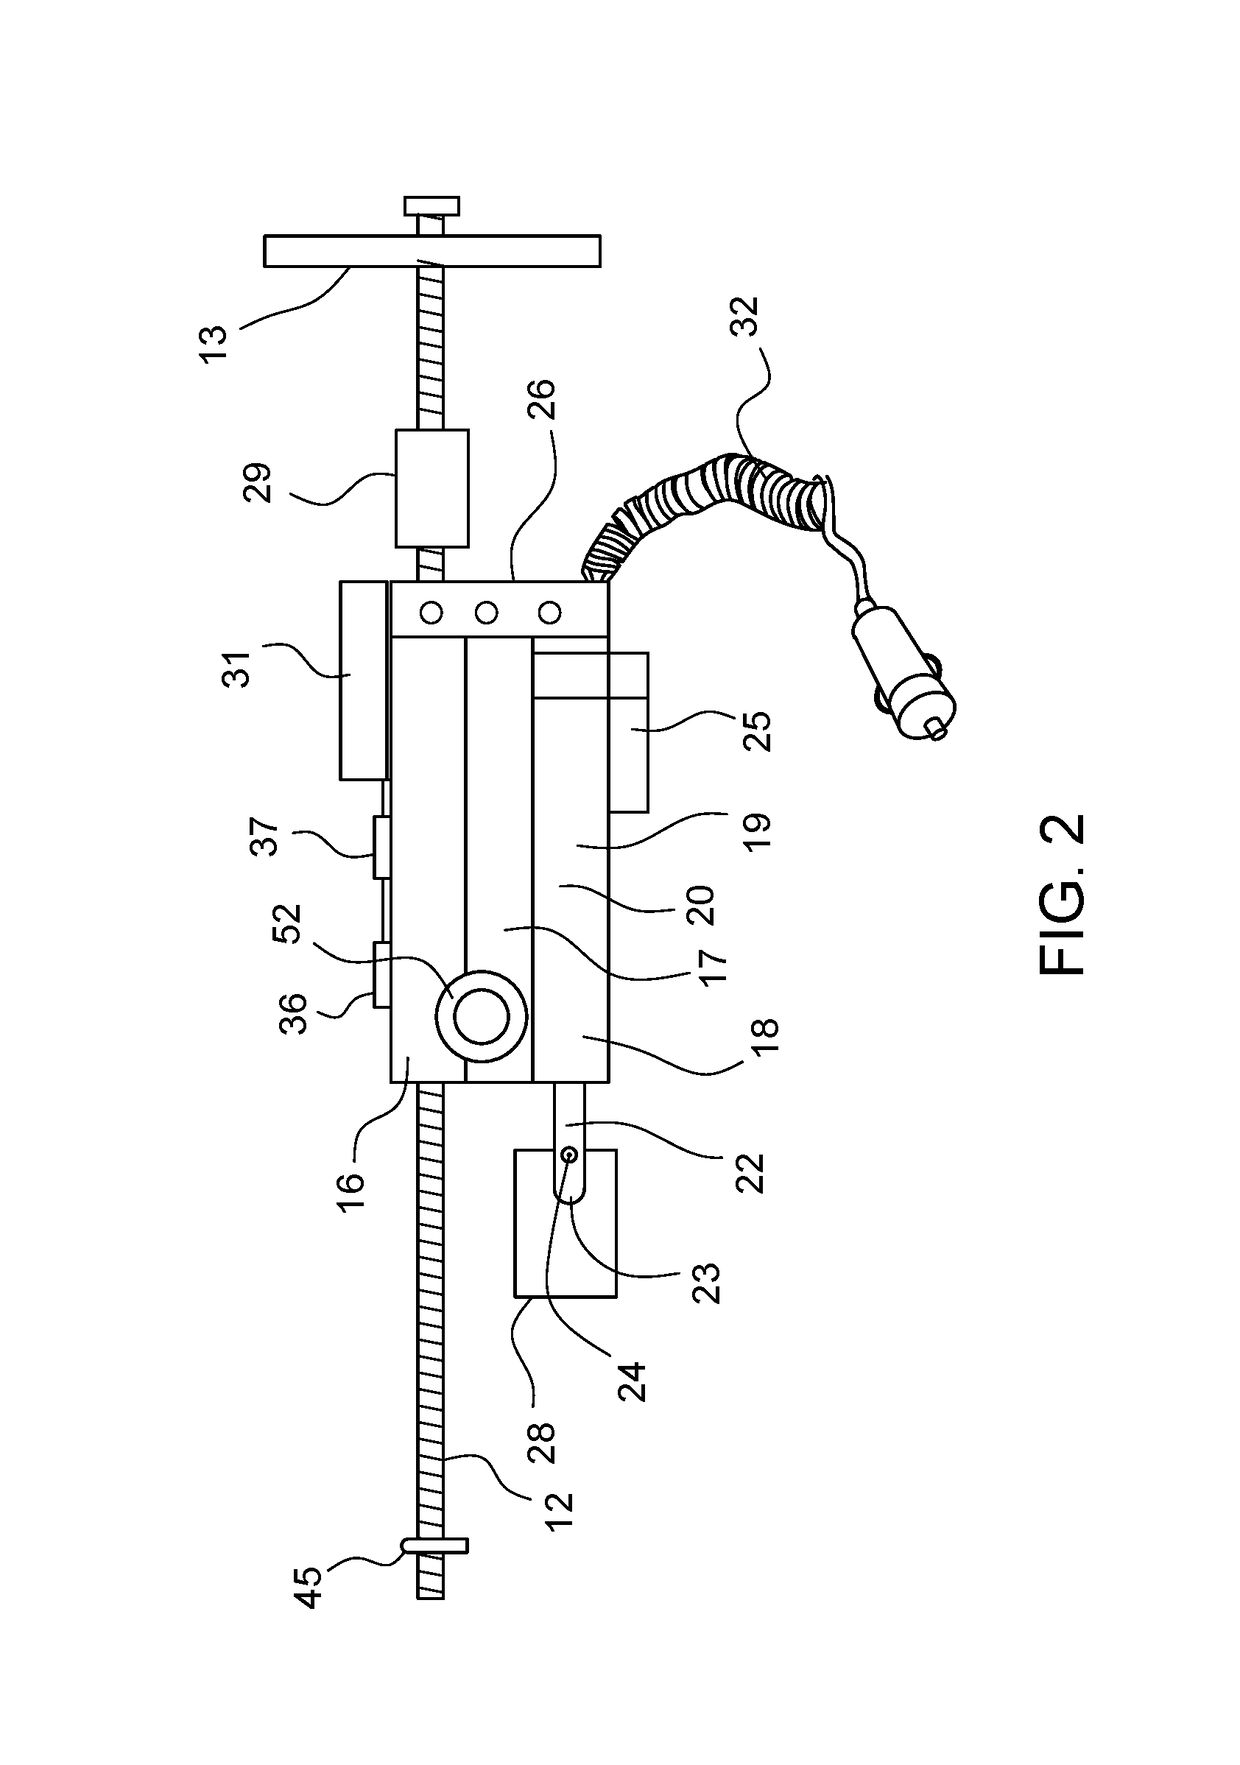 Electronic vehicle pedal activation system